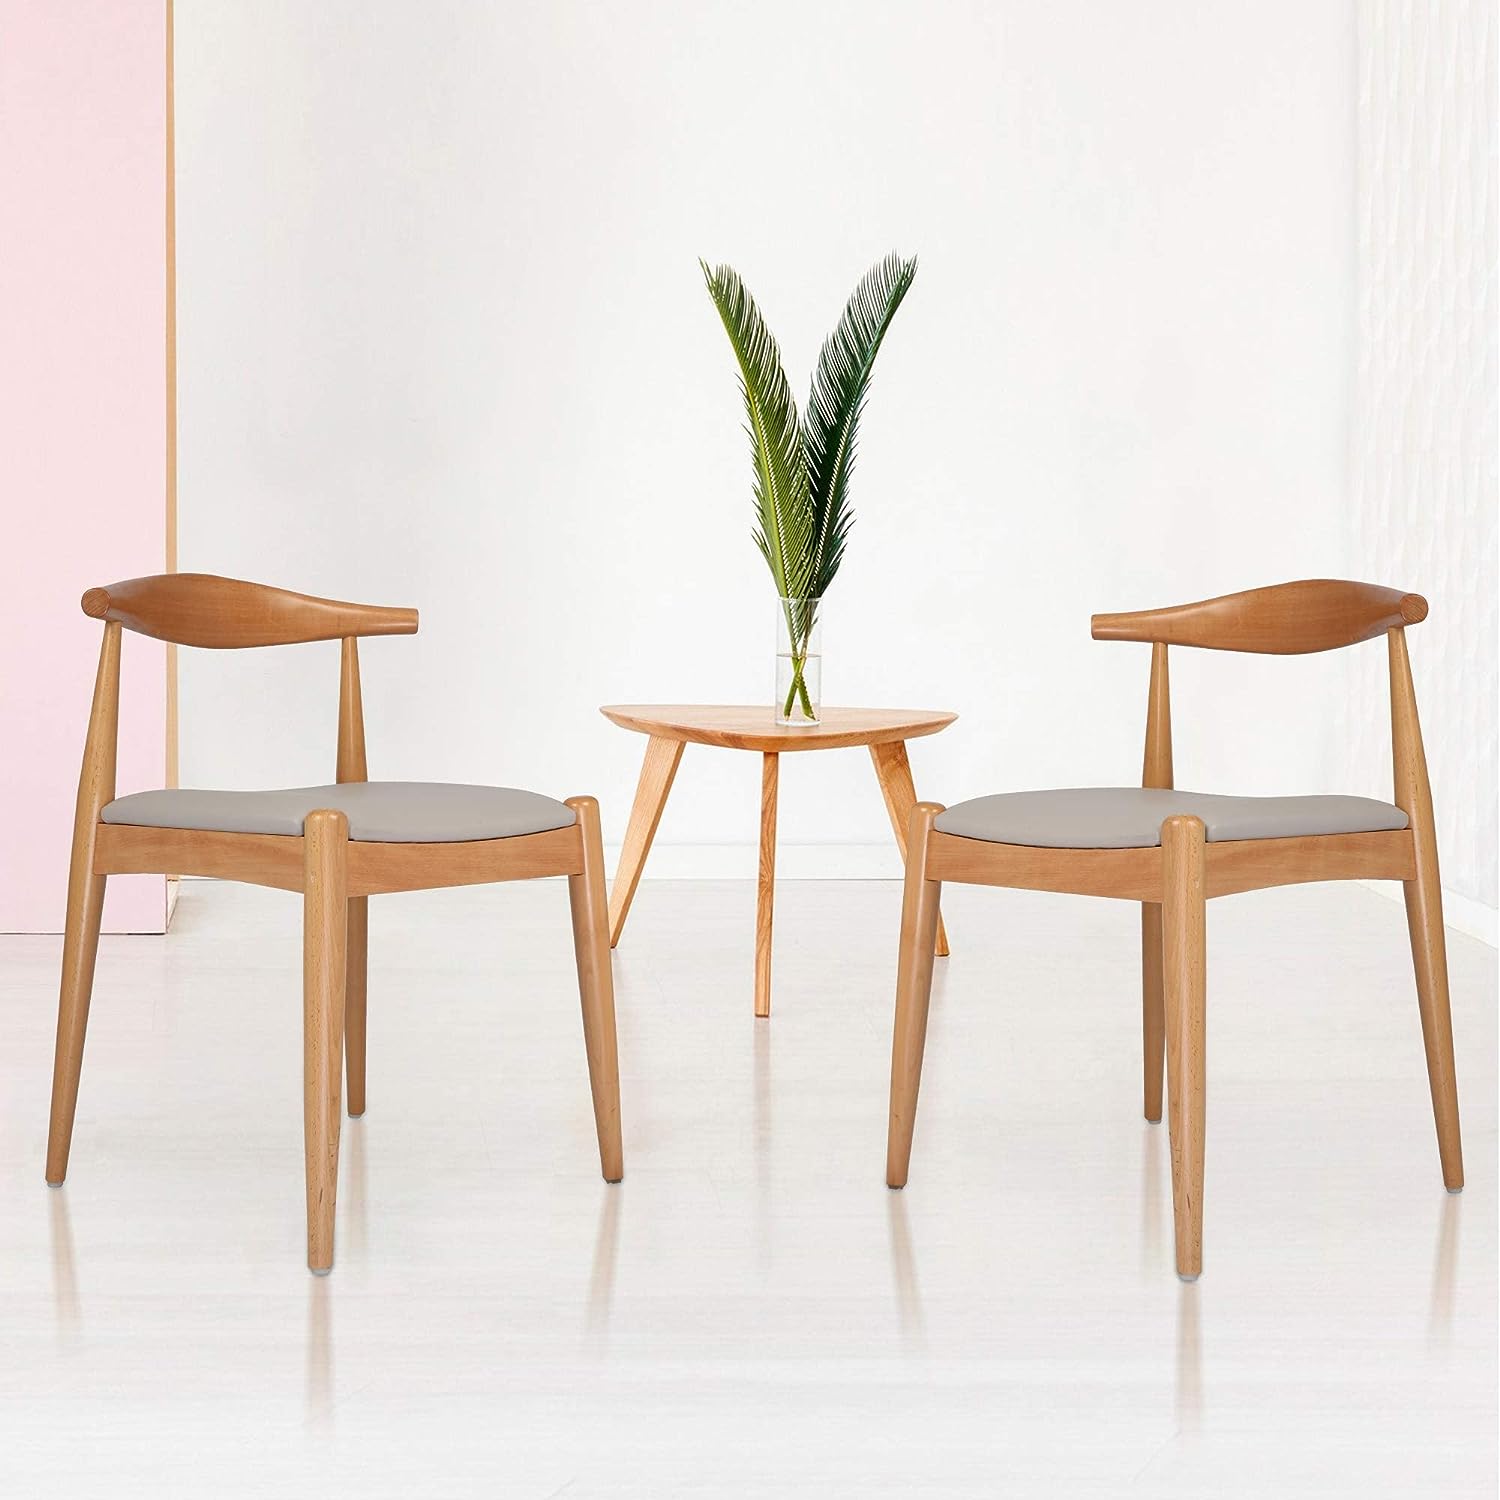 LUCKYERMORE Set of 2 Upholstered Solid Wood Side Chairs Modern Kitchen Chairs, Oak